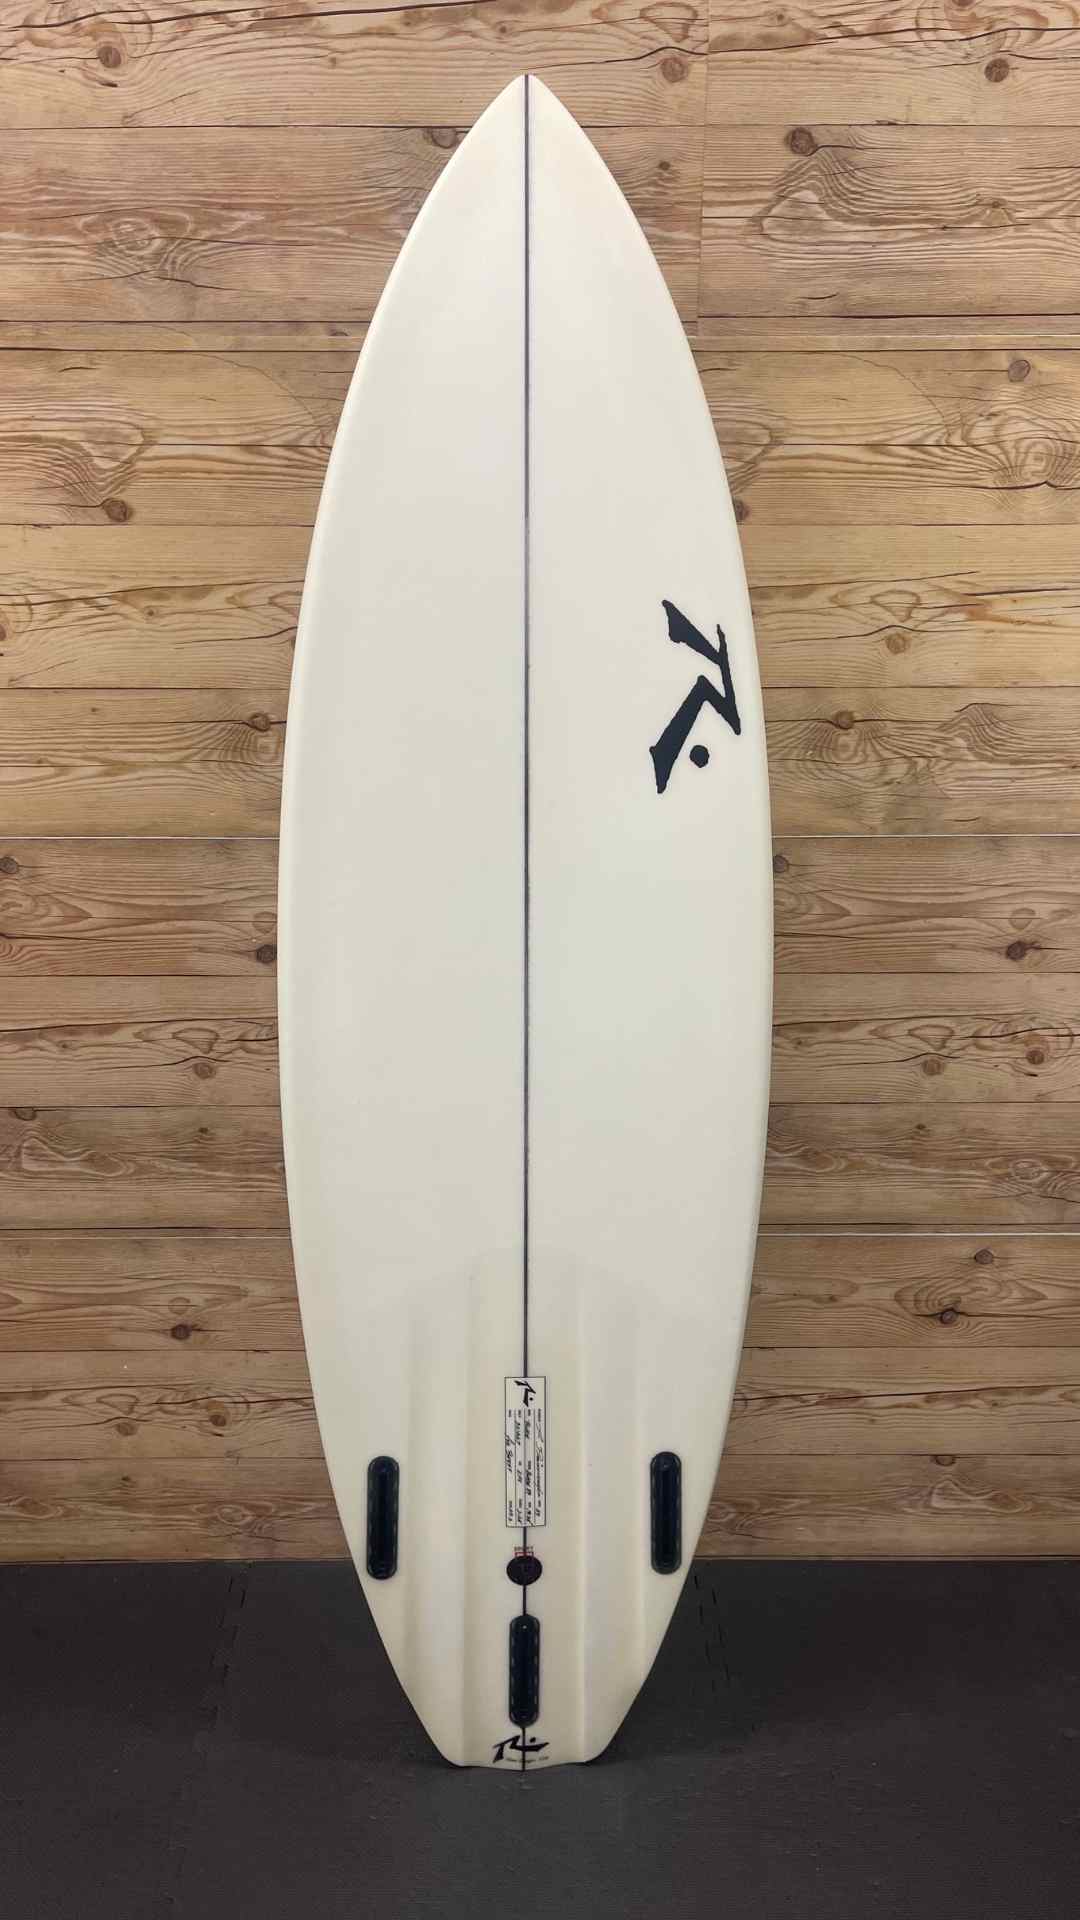 The Blade 5'9"